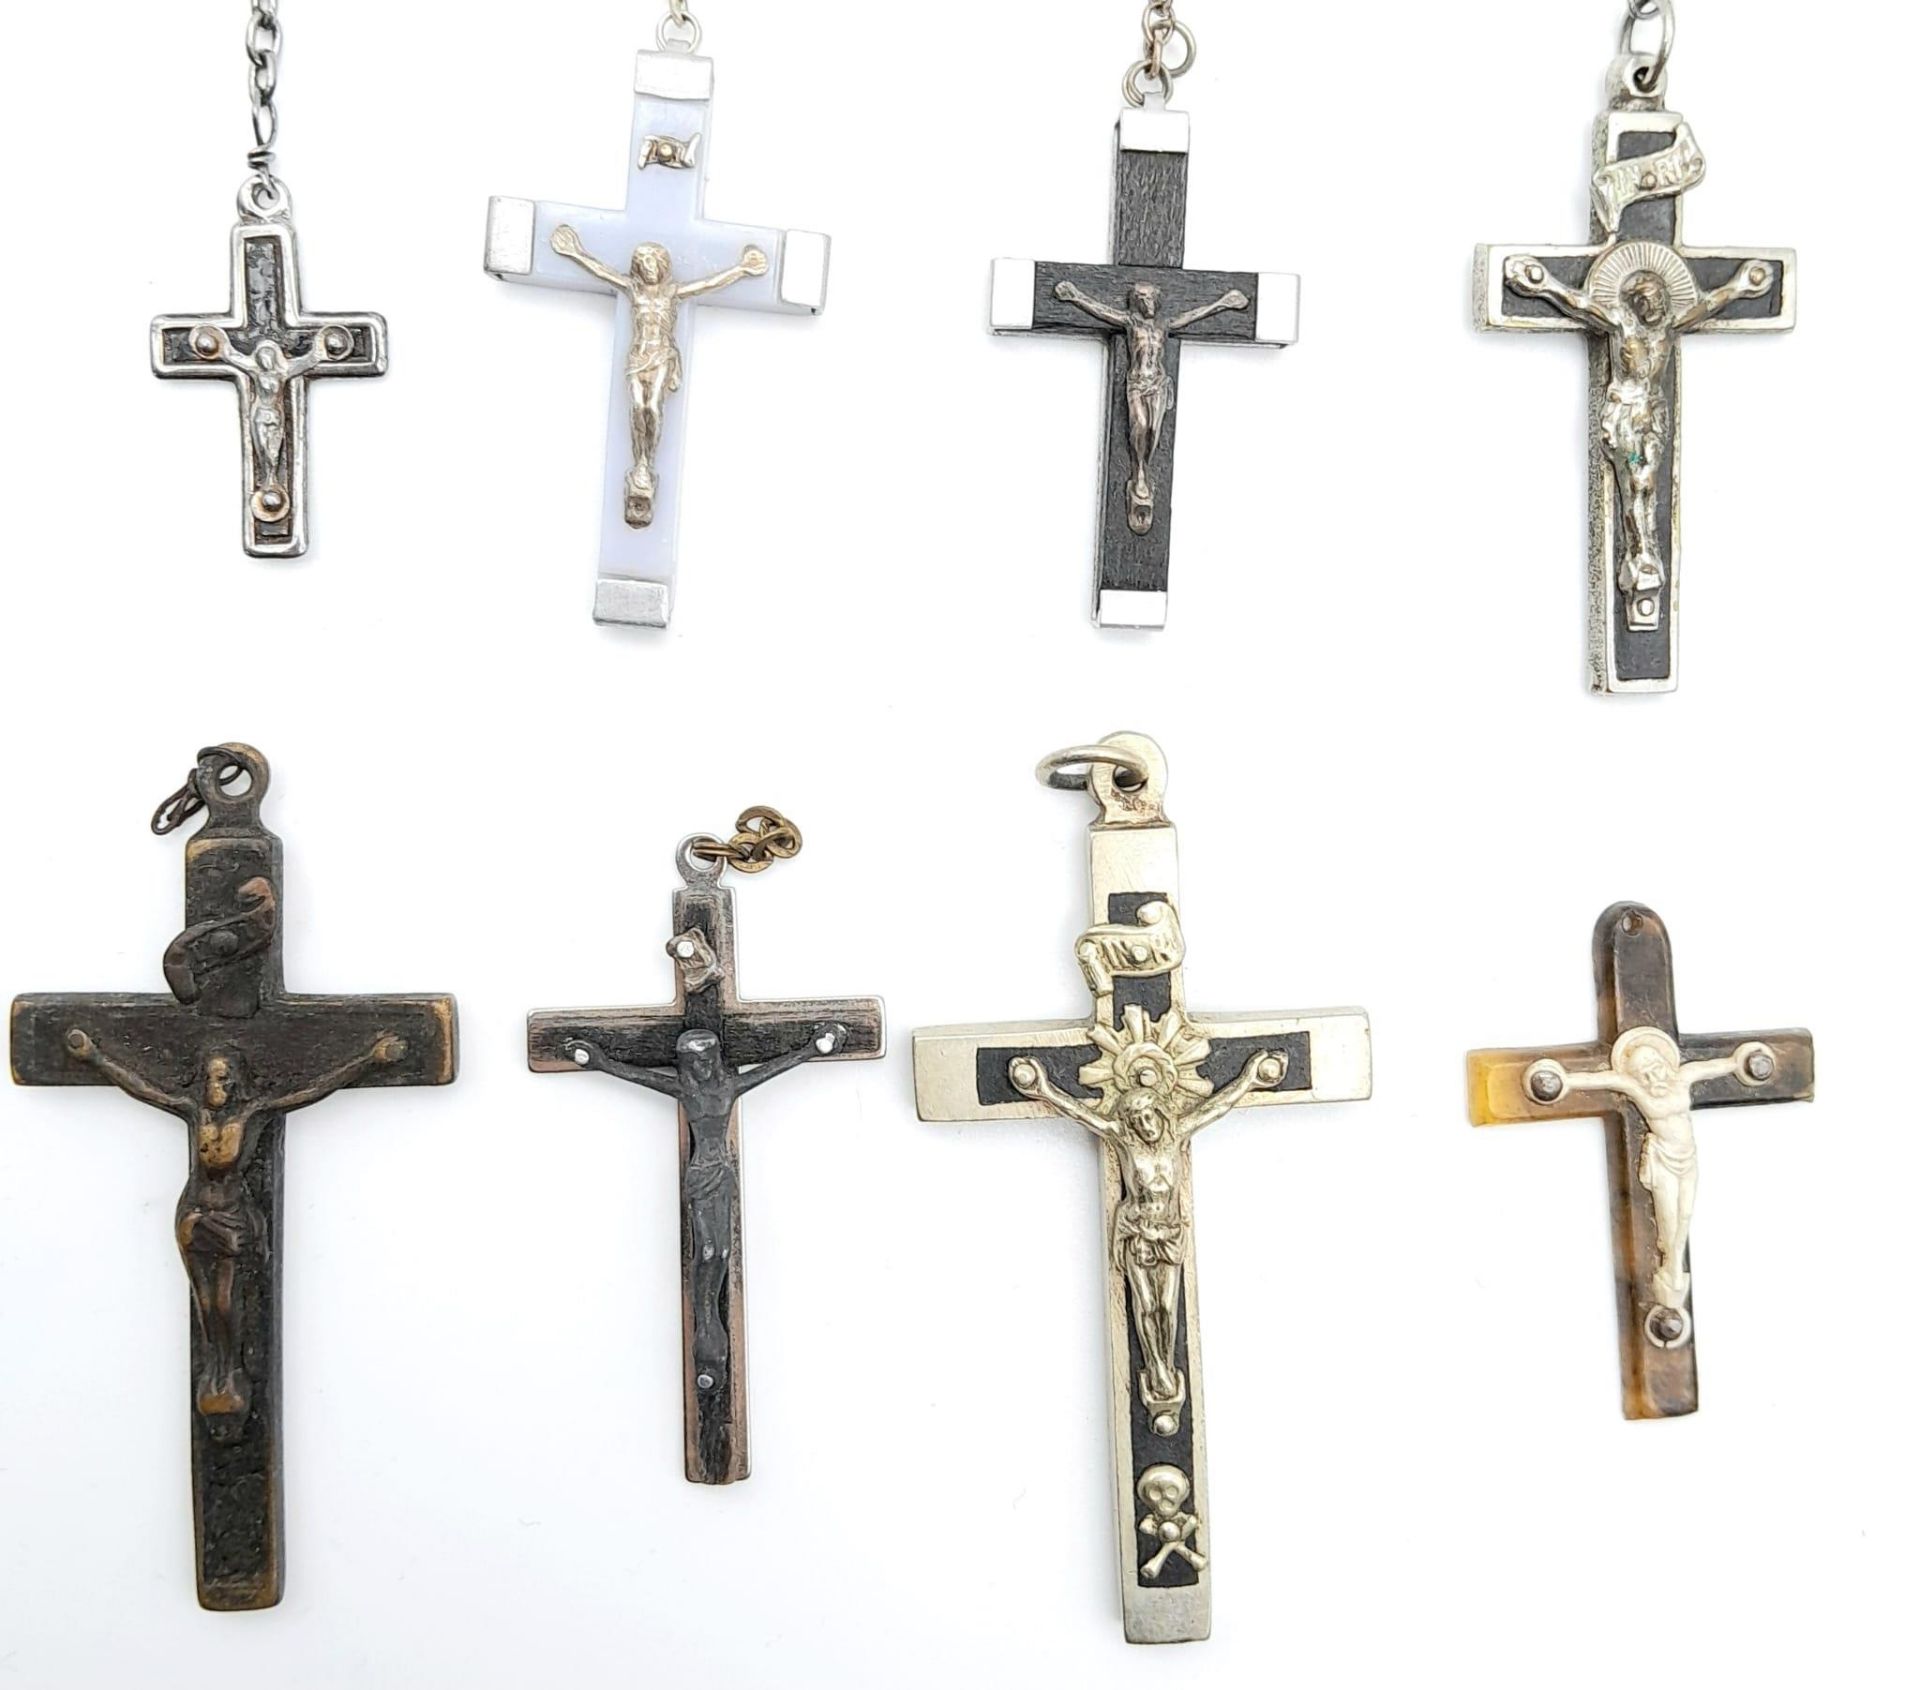 A Small Collection of Crucifix Pendants and Prayer Beads. All kept in a small decorative wood box. - Bild 3 aus 6